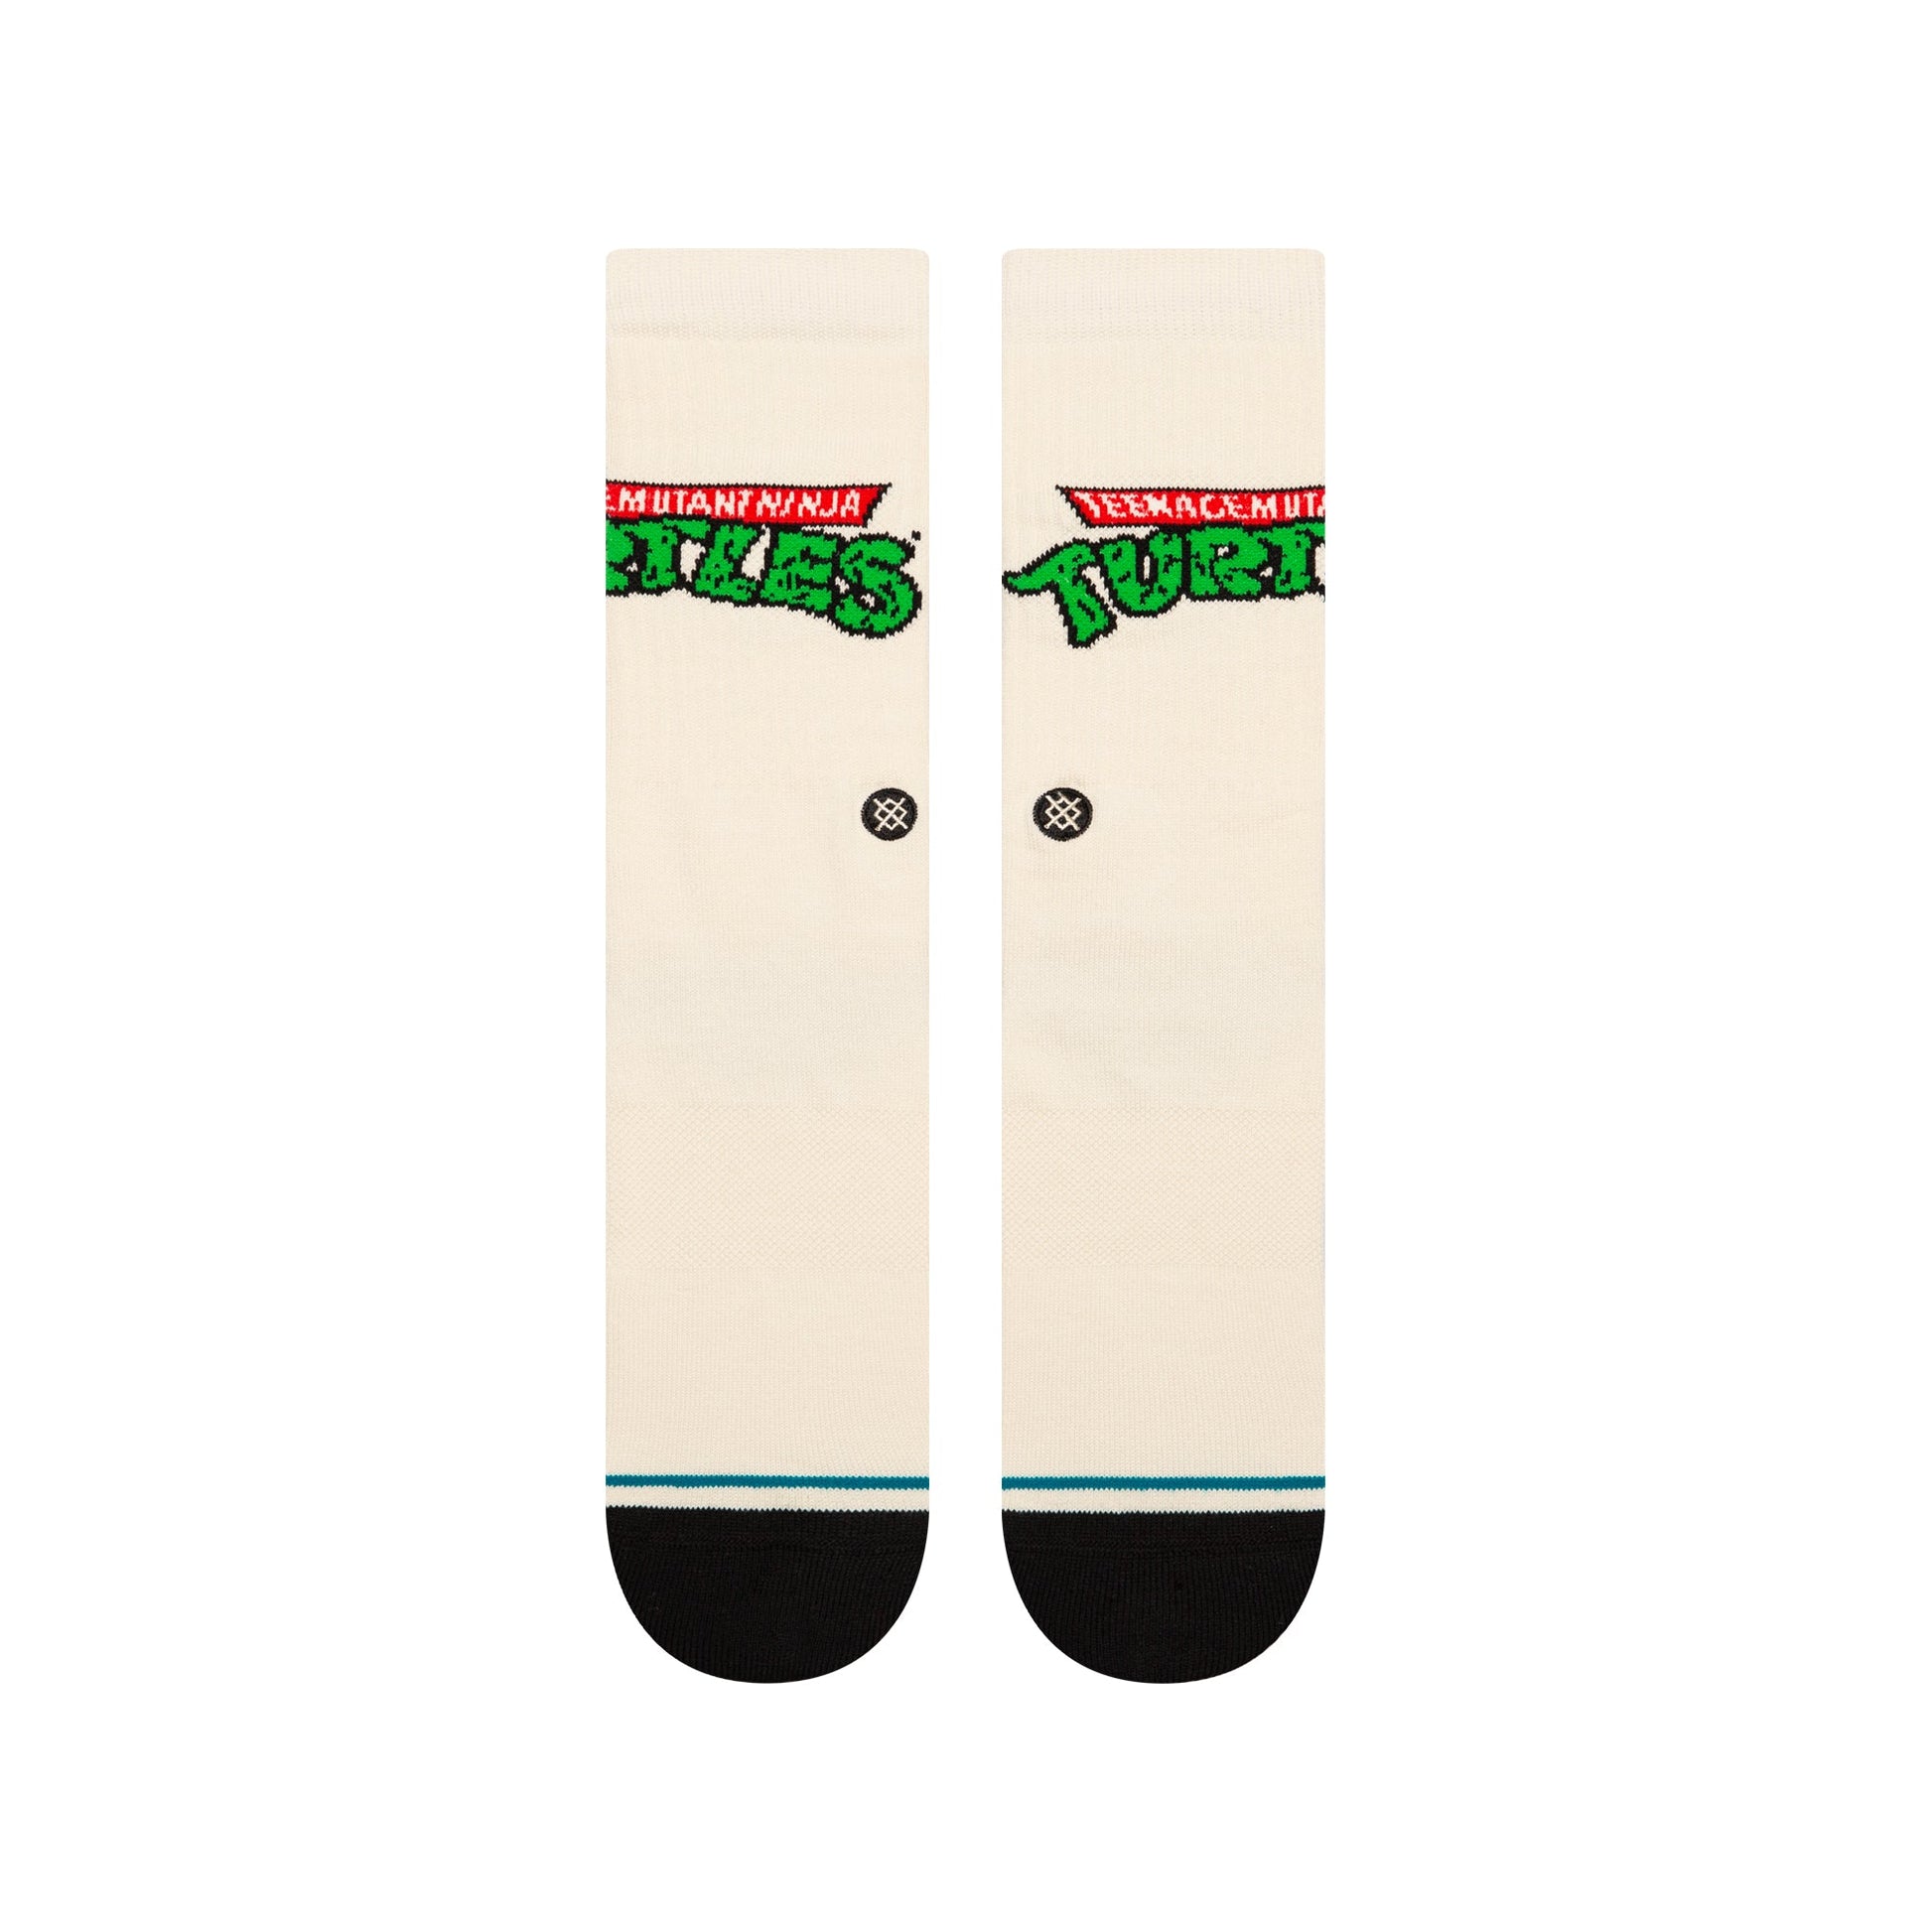 Stance Turtles Crew Sock Off White